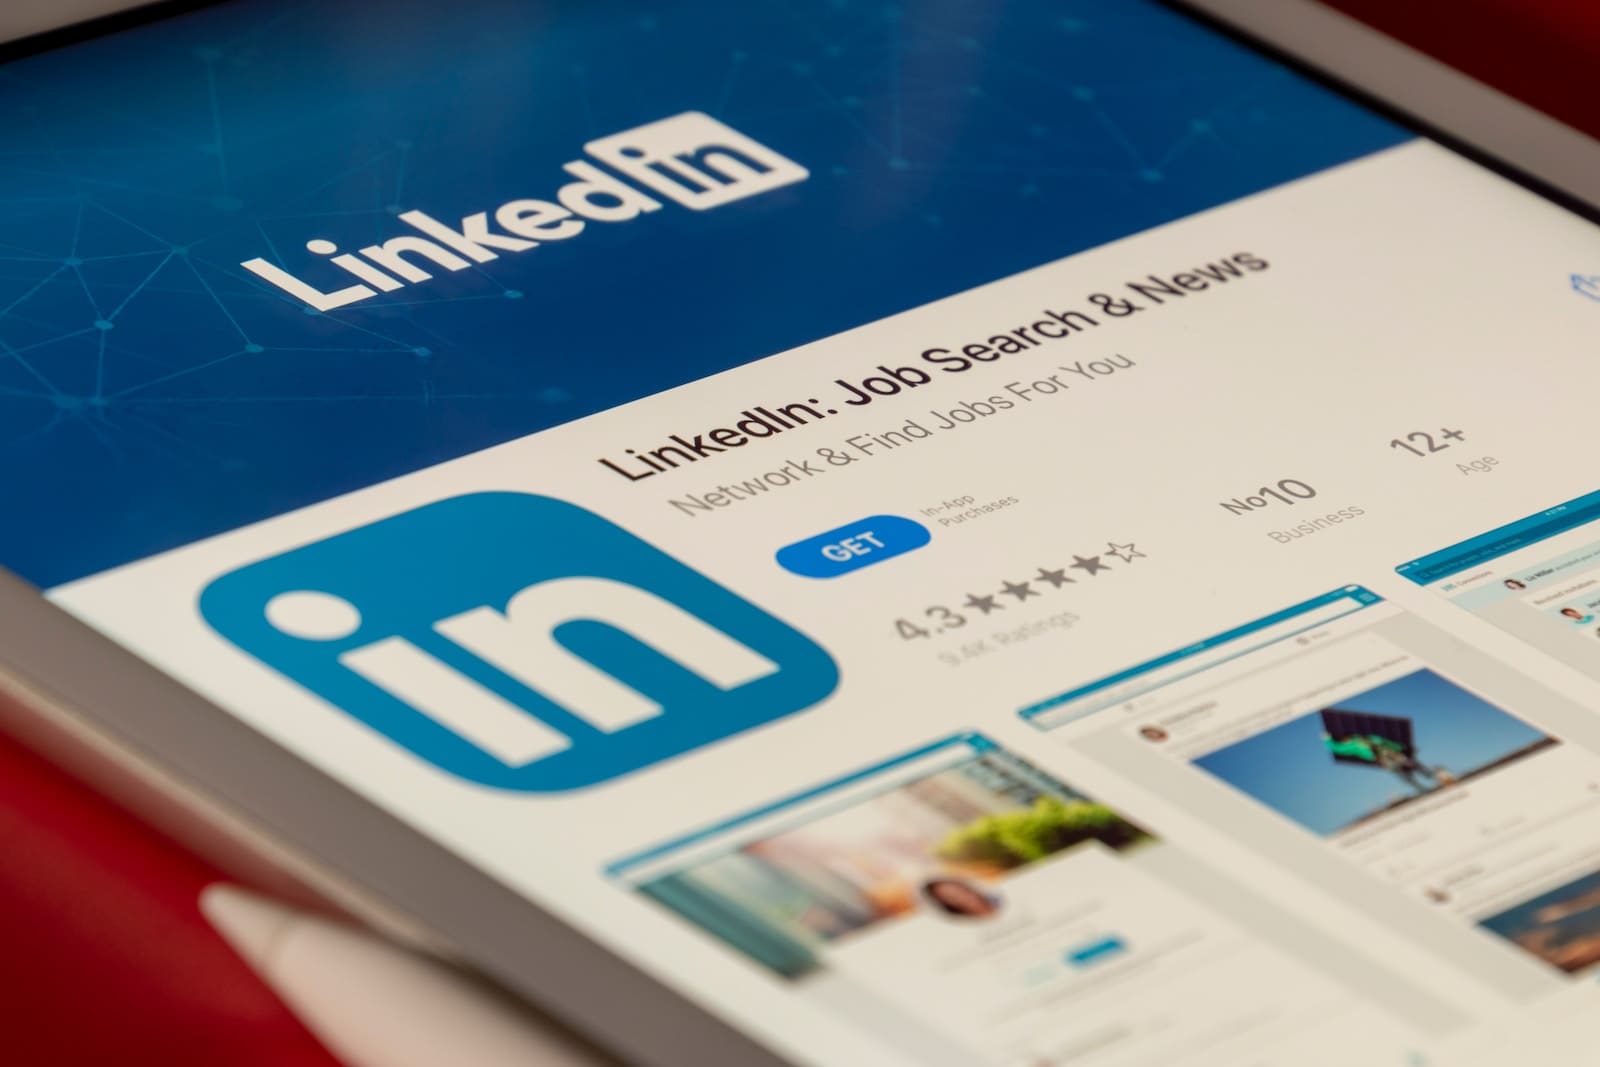 How to Enhance your LinkedIn Profile